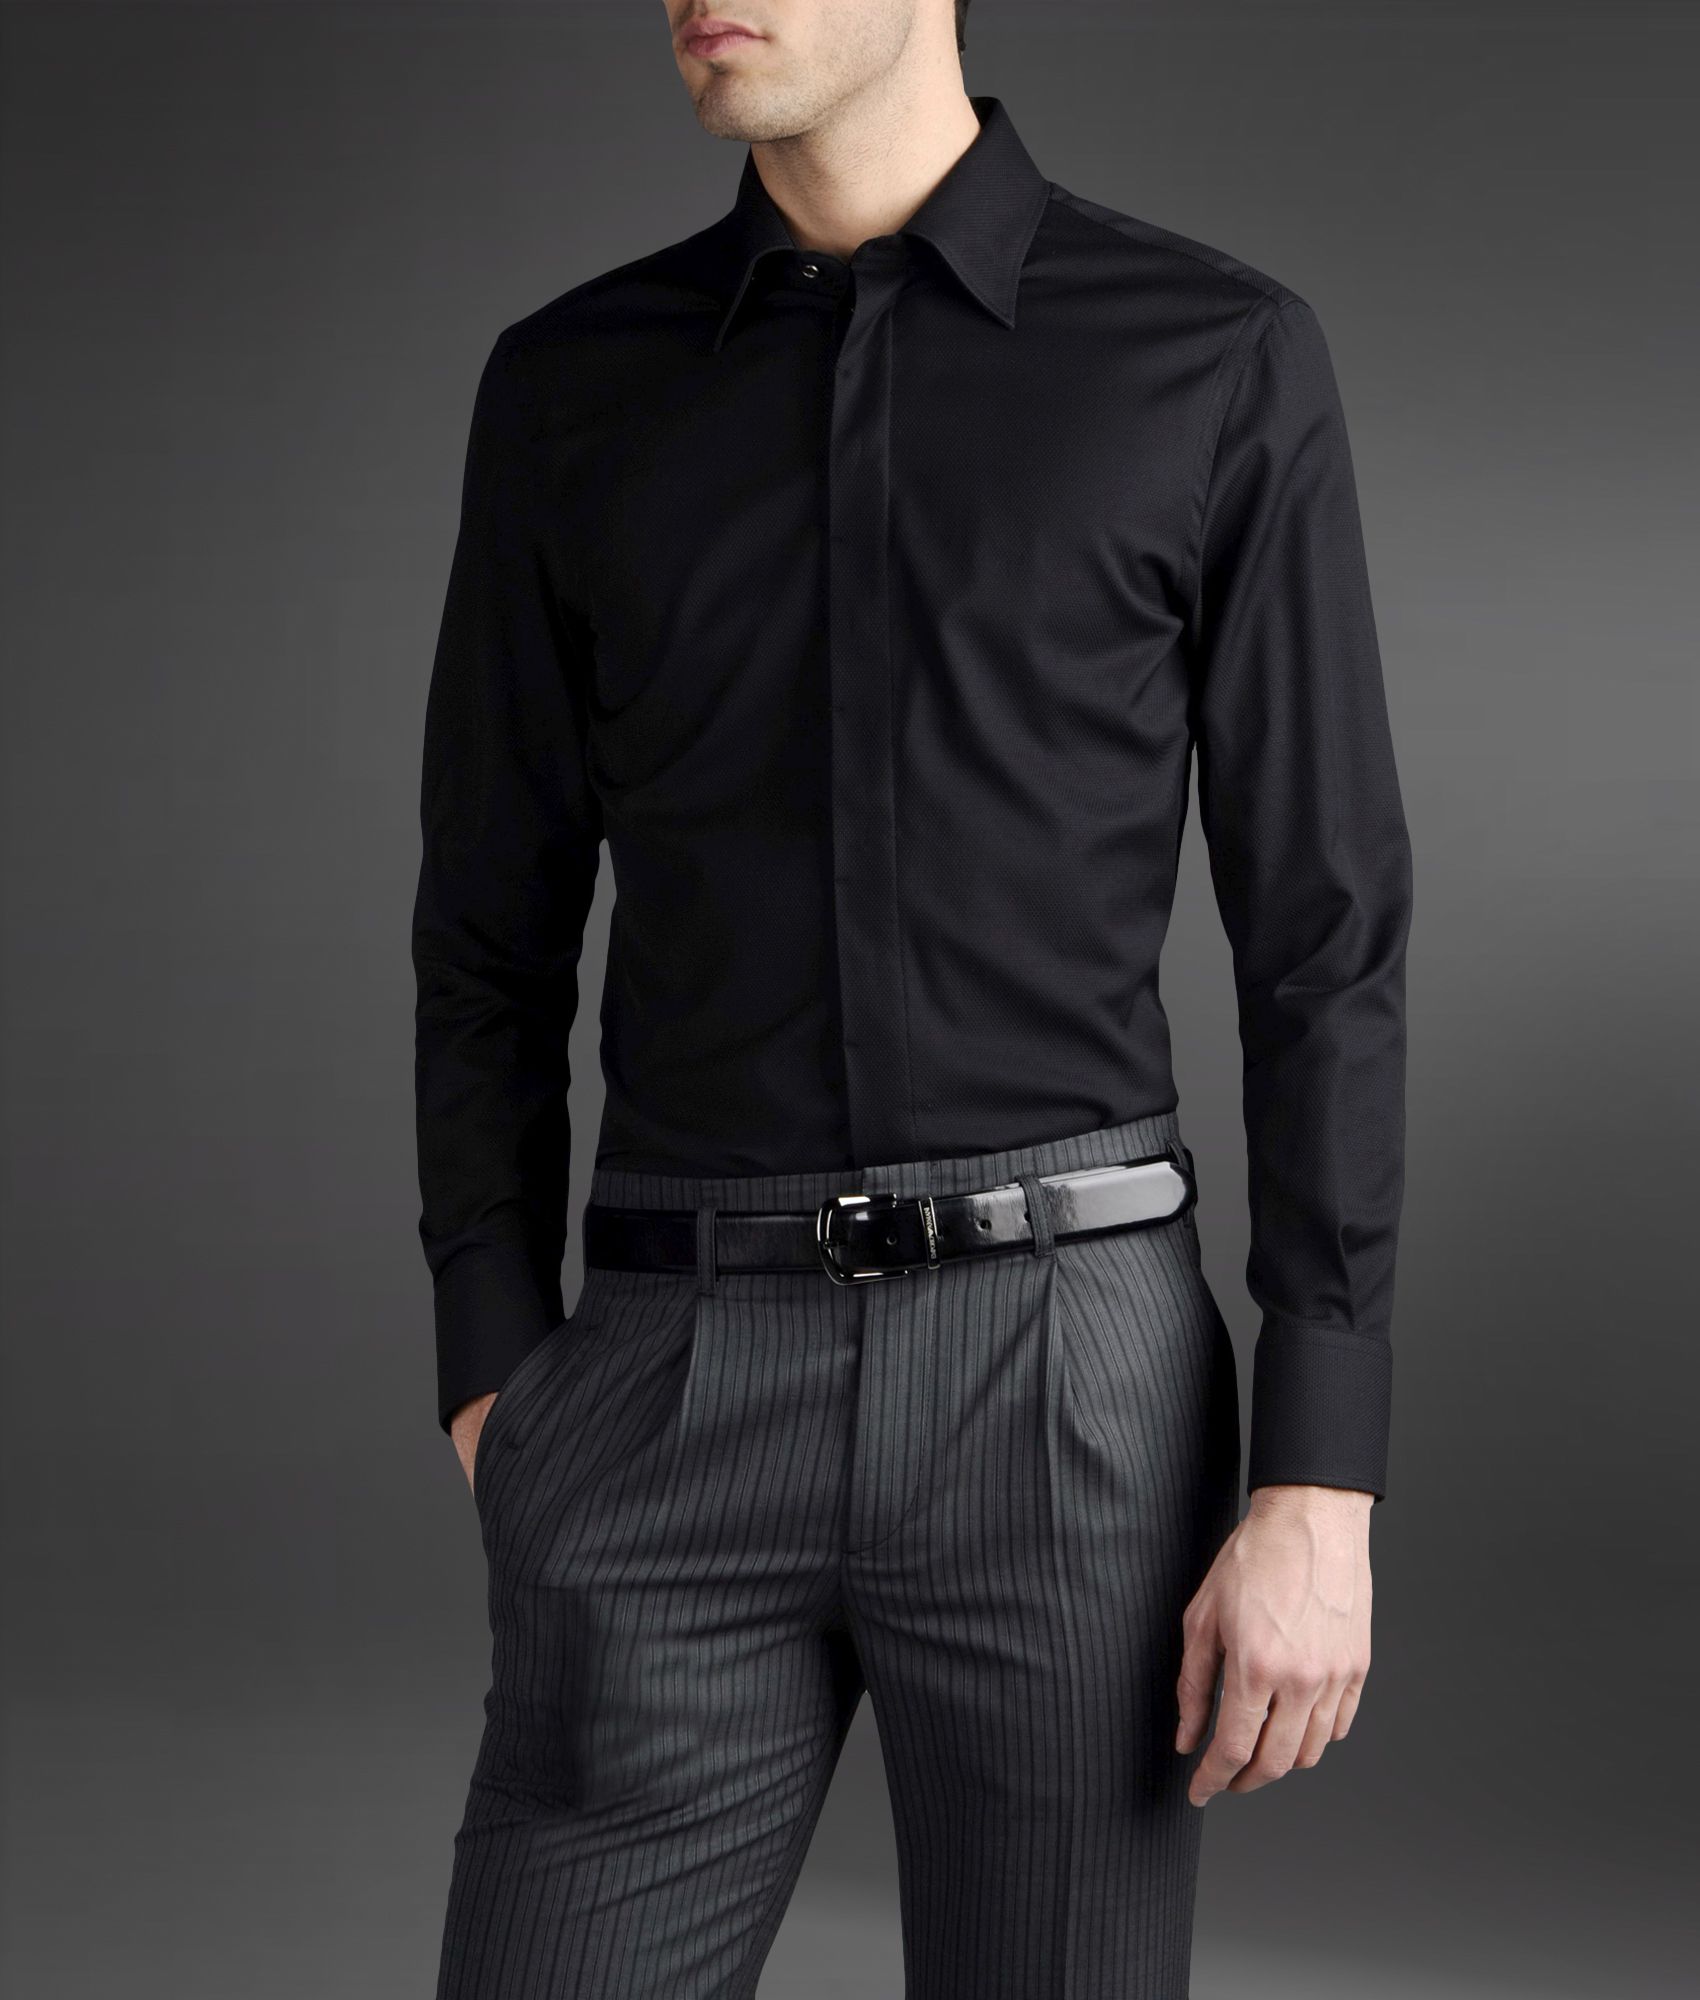 Lyst - Emporio Armani Long Sleeve Shirt in Black for Men